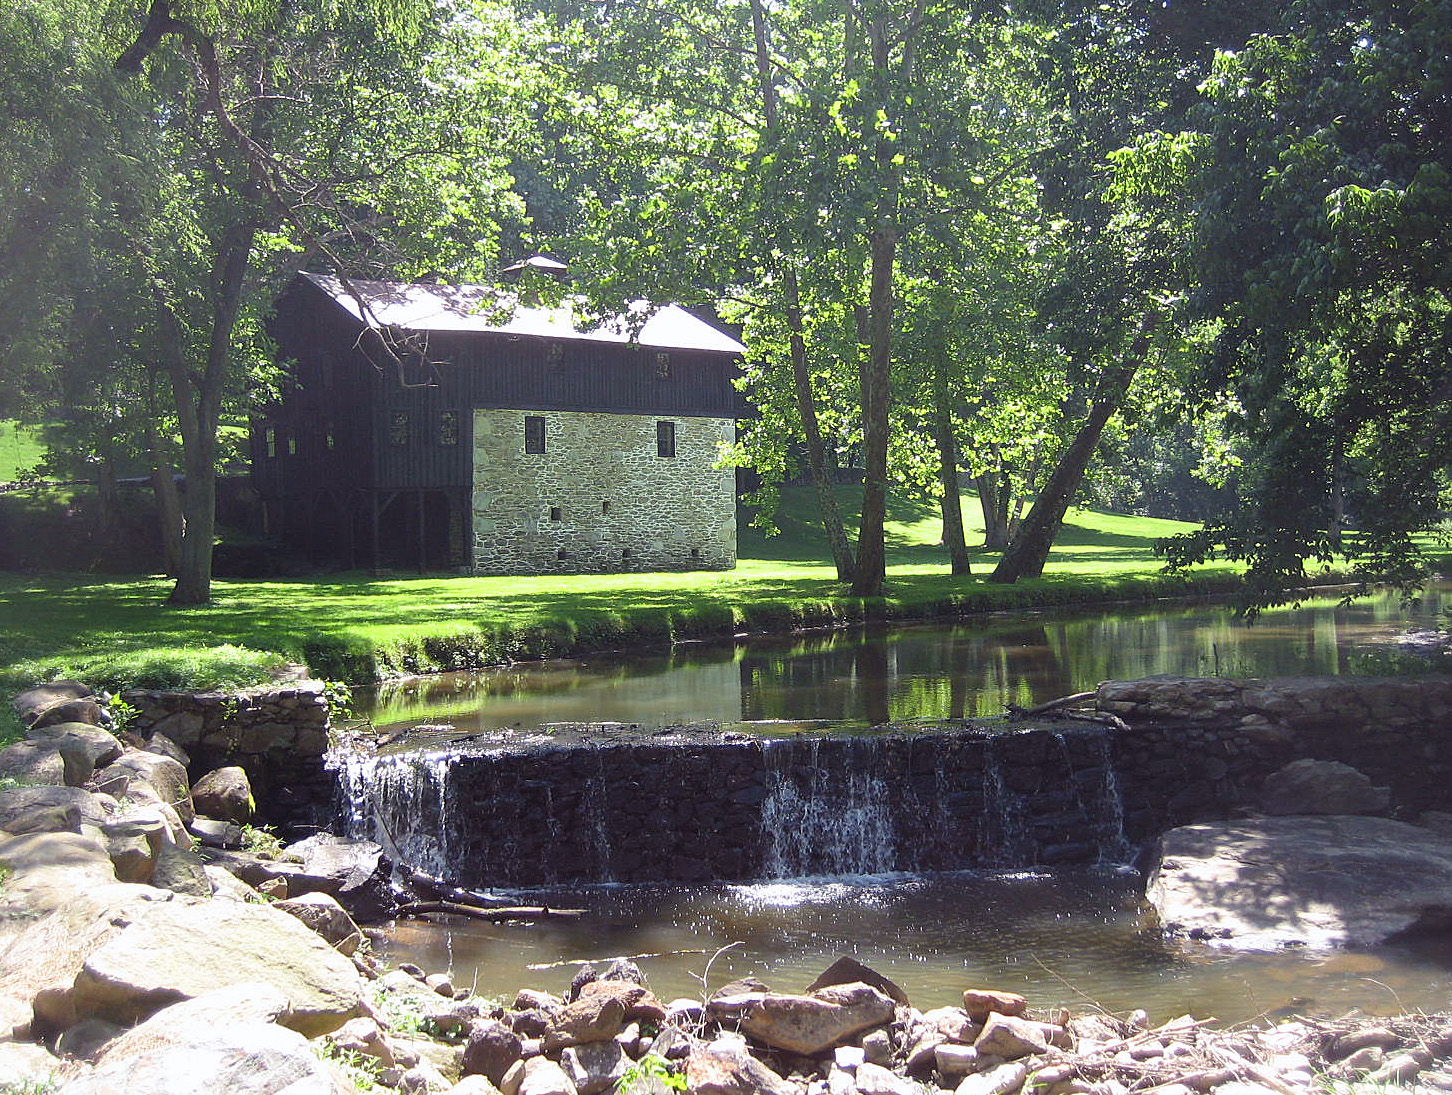 030-0659_Hatchers_Mill_2007_view_of_mill_and_creek_VLR_online-DHR